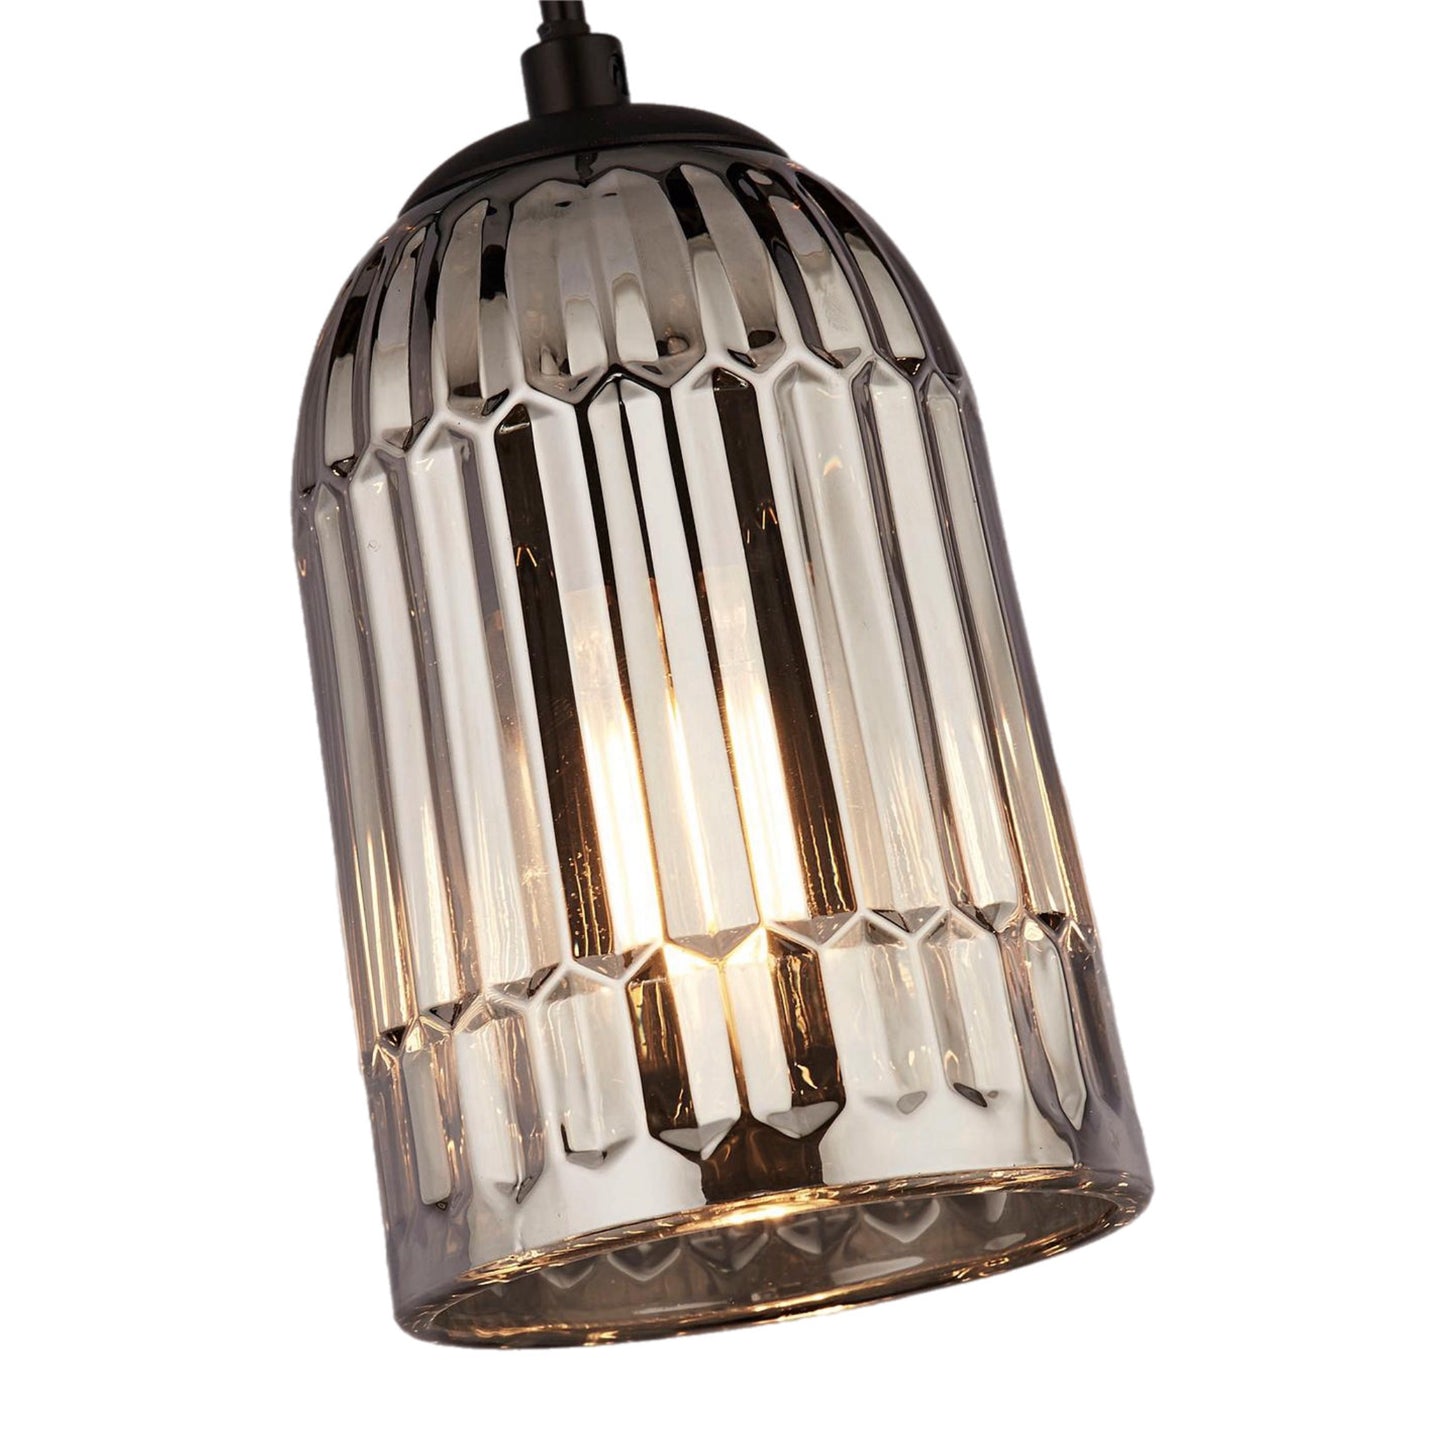 Smokey glass is the perfect material if you want to create a tranquil environment. The subtle glow of the bulb shines our through the ridged shade which is hung from a round metal ceiling mount. Weather you're wanting a warm welcome home in the hall or looking to light a living room or dressing room this is the perfect home accessory.